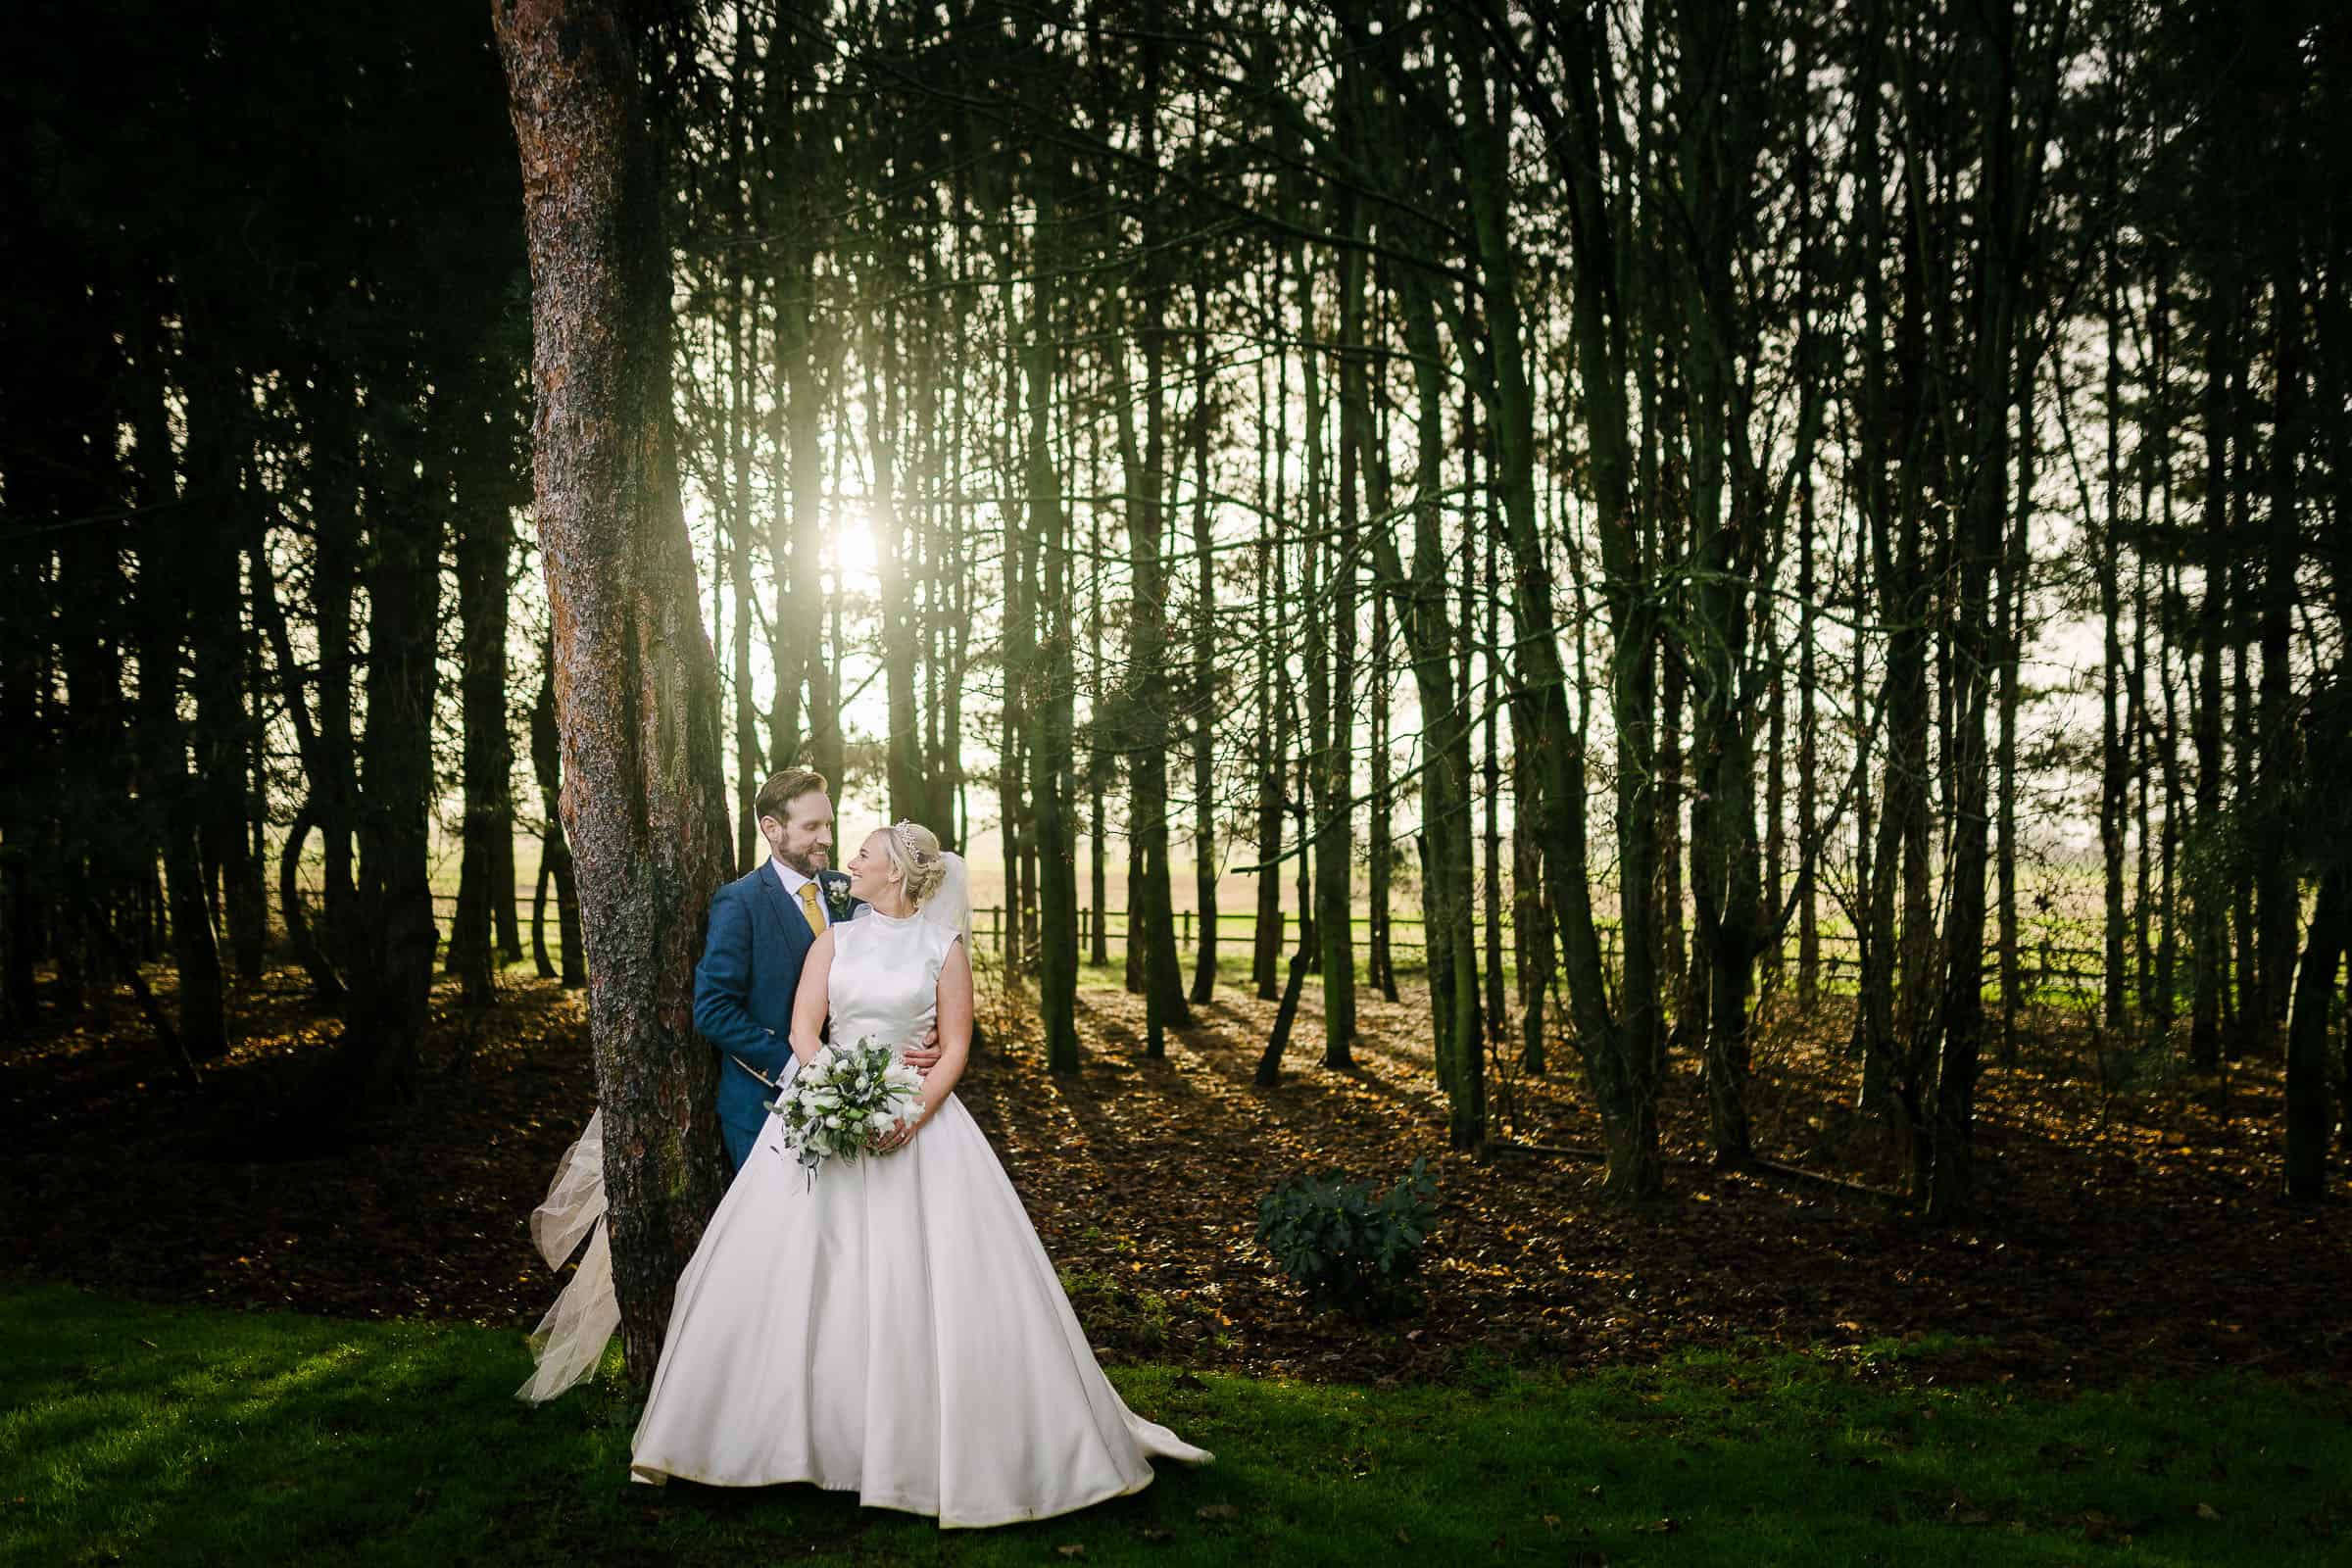 Capture this Bunny Hill winter wedding photography in Yorkshire